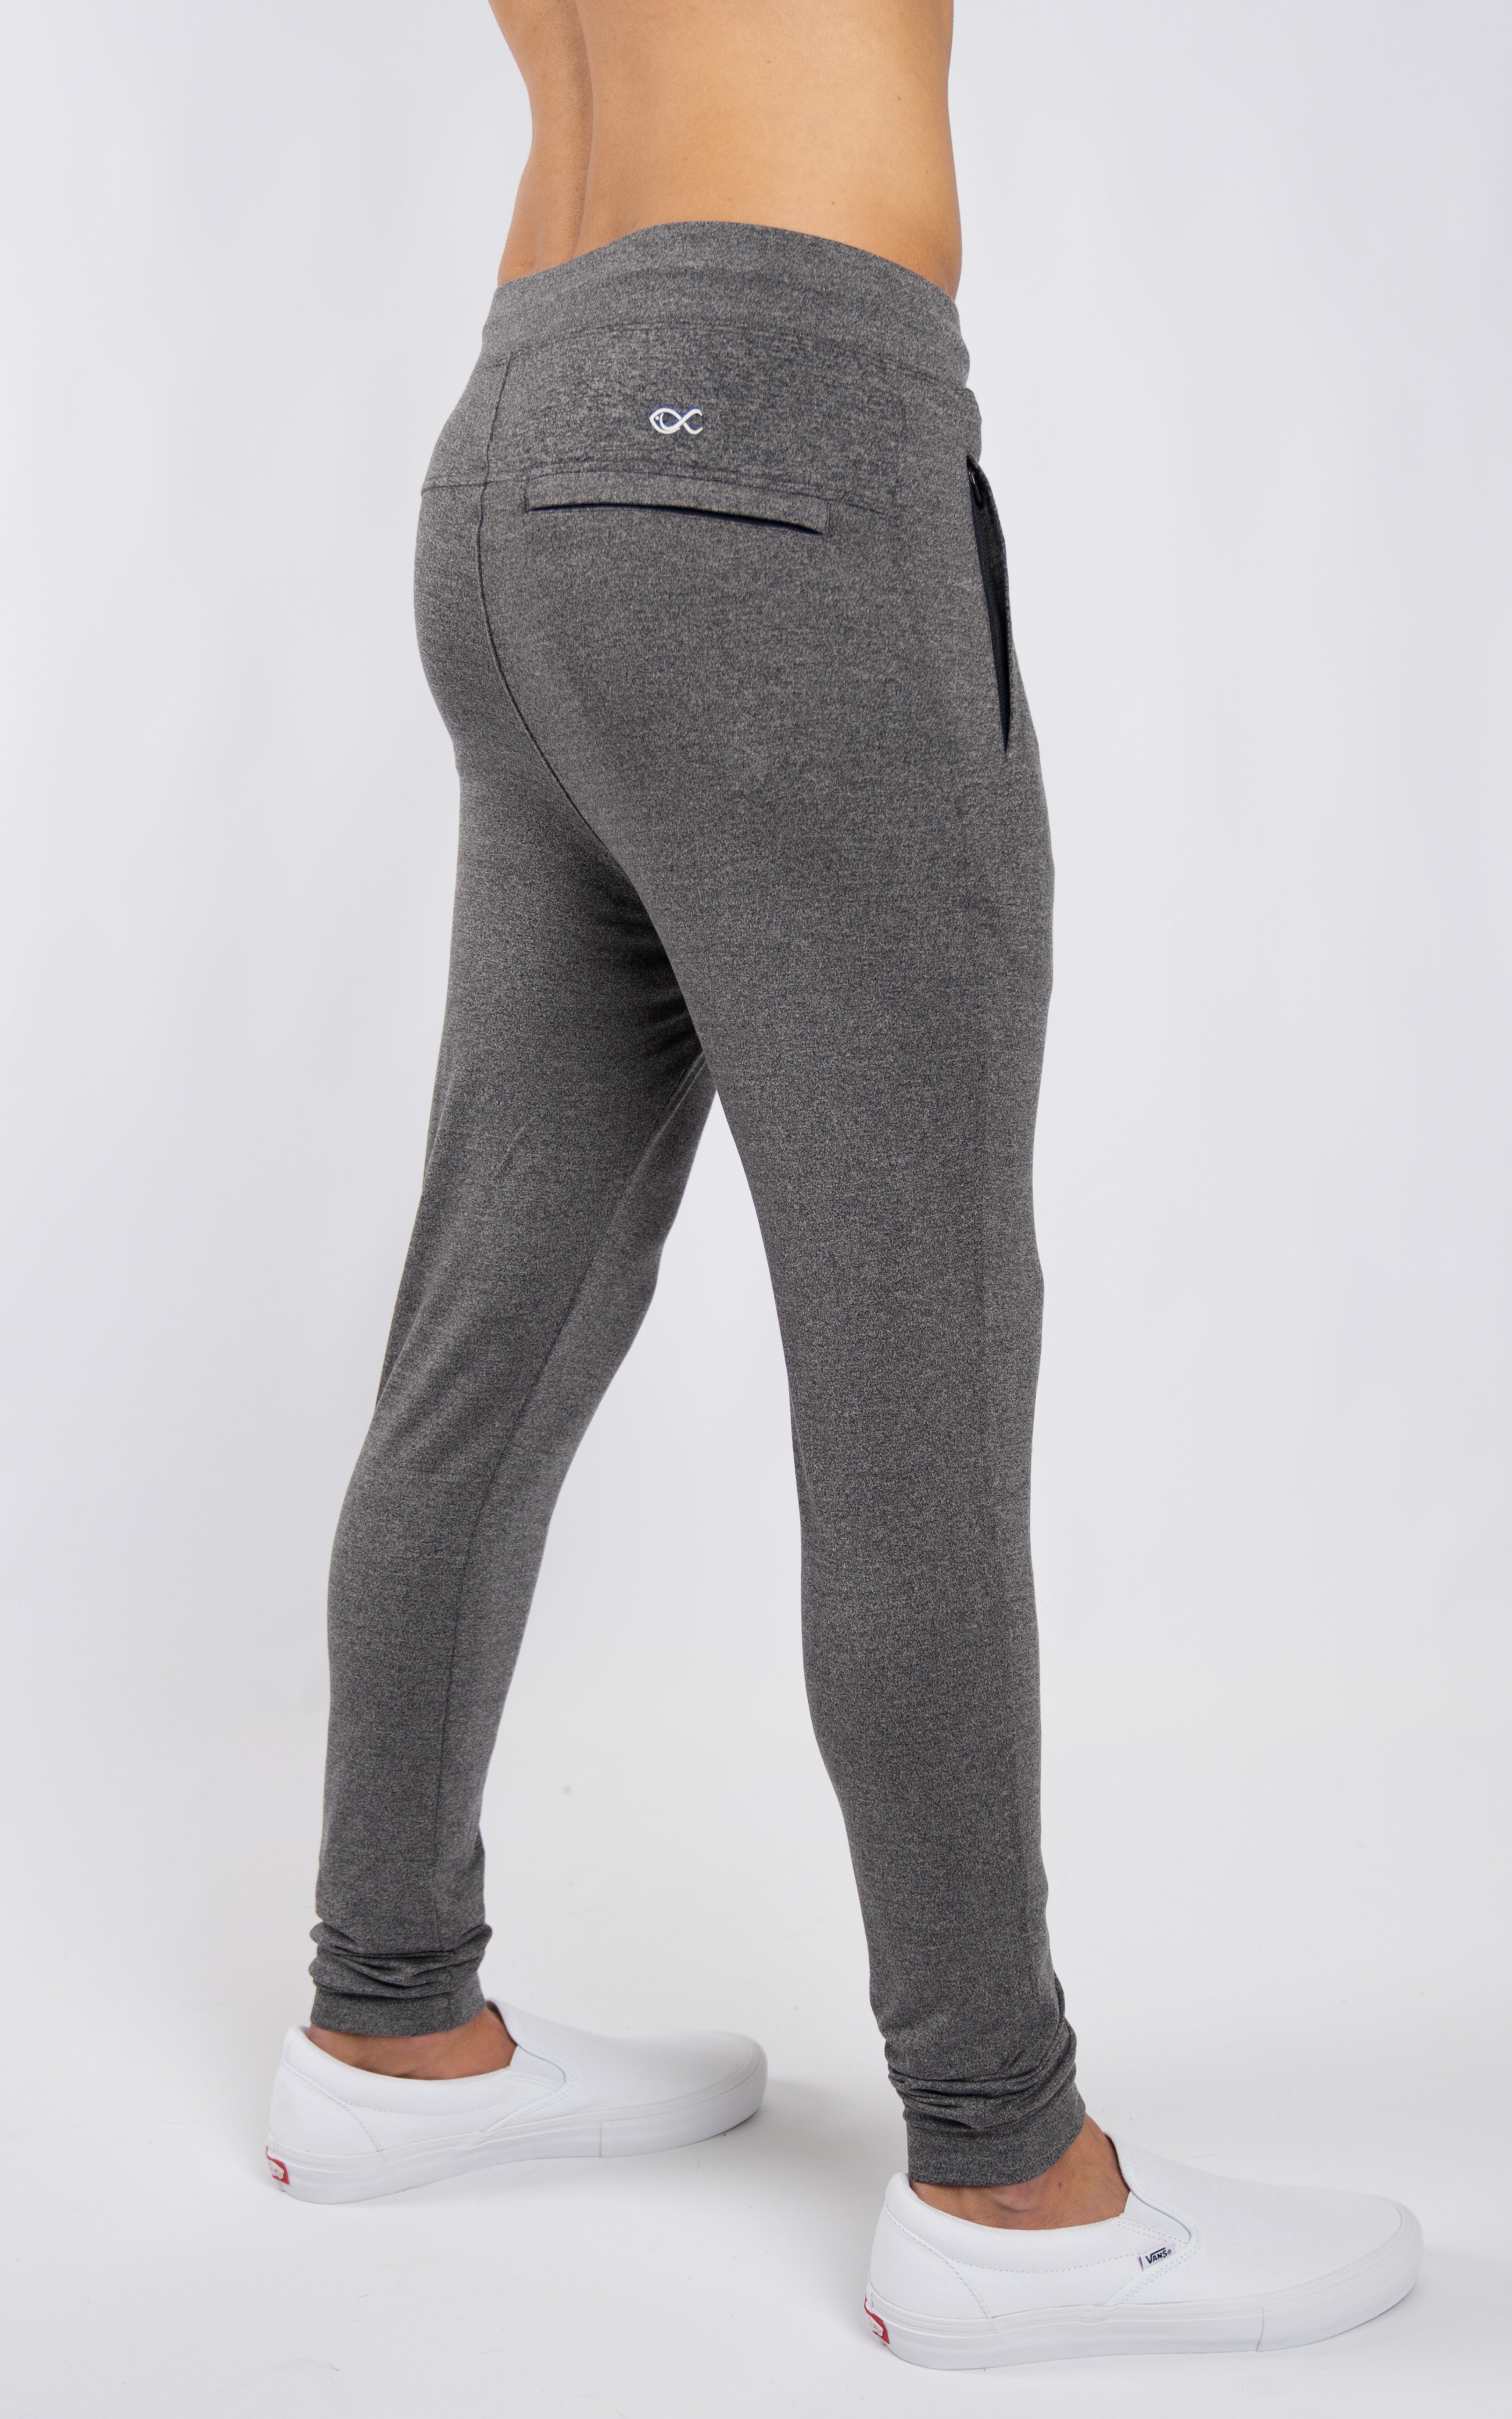 Men's Premium Joggers in Charcoal Gray - Southern Athletica